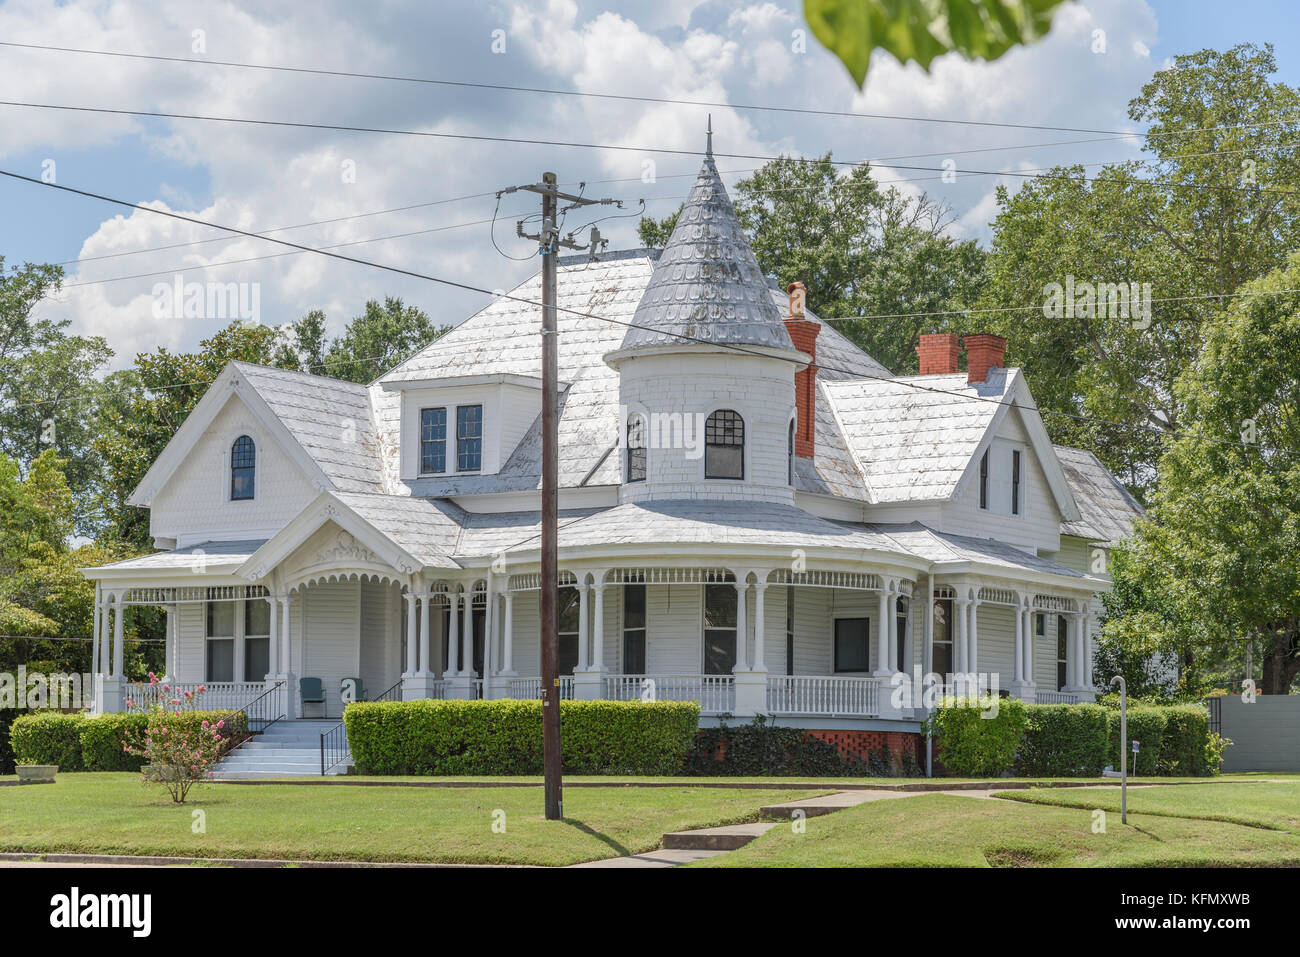 Restored old victorian house with a full wrap around front porch in Union Springs, Alabama USA. Stock Photo